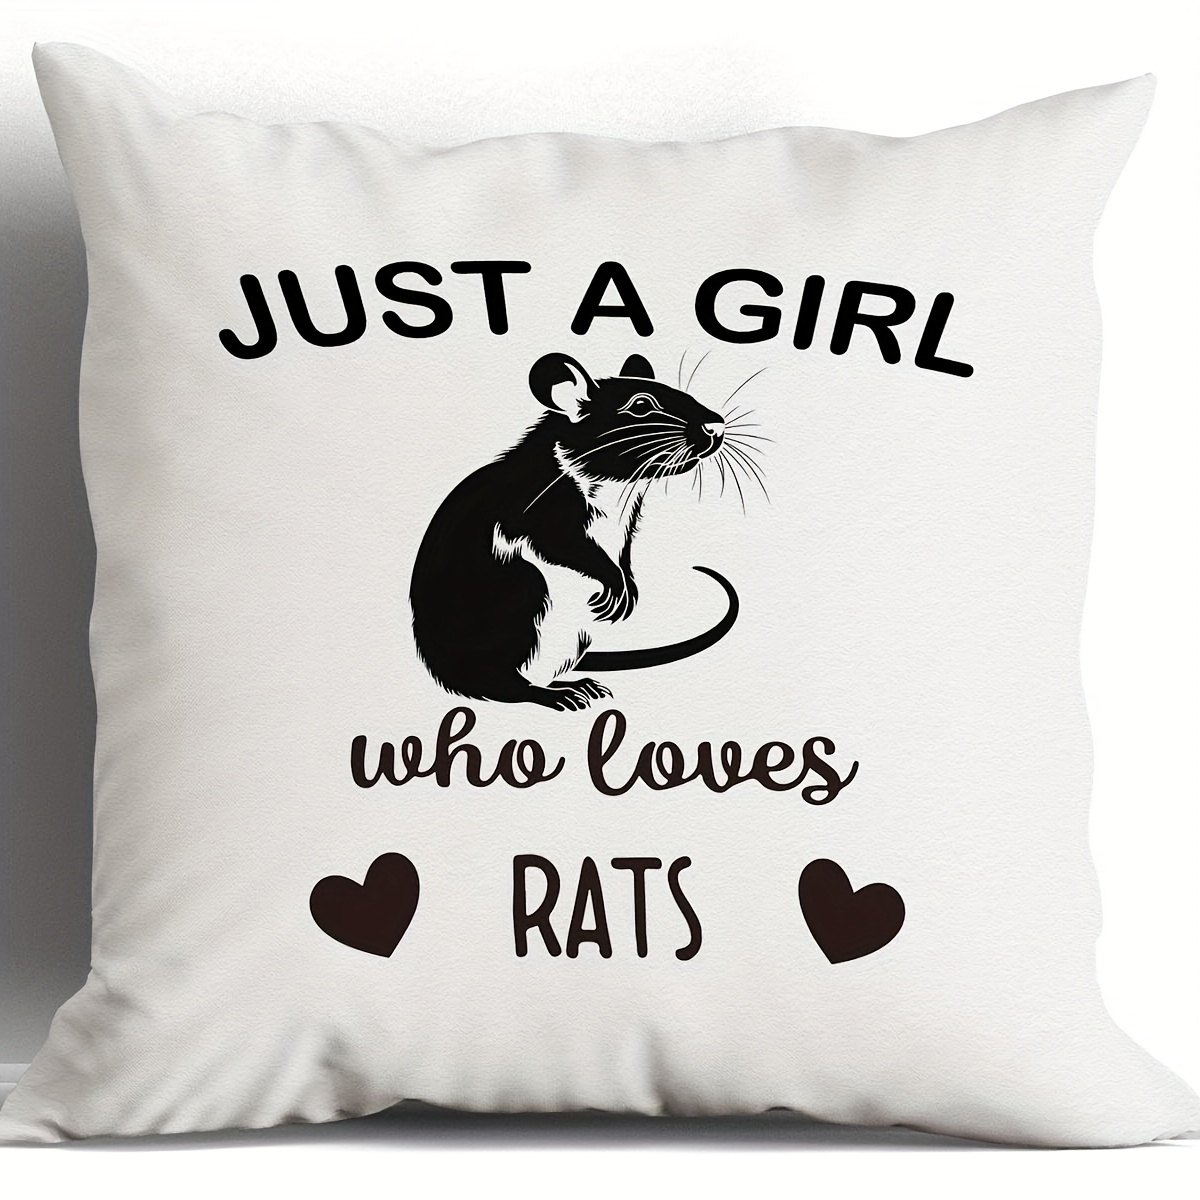 

1pc Rat Pet Pillow Cover, Rat Gift For Rat Lovers, Pet Lover Gift, Cute Rat Decor, Just Love Rats Throw Pillow Cover 18x18 Inch